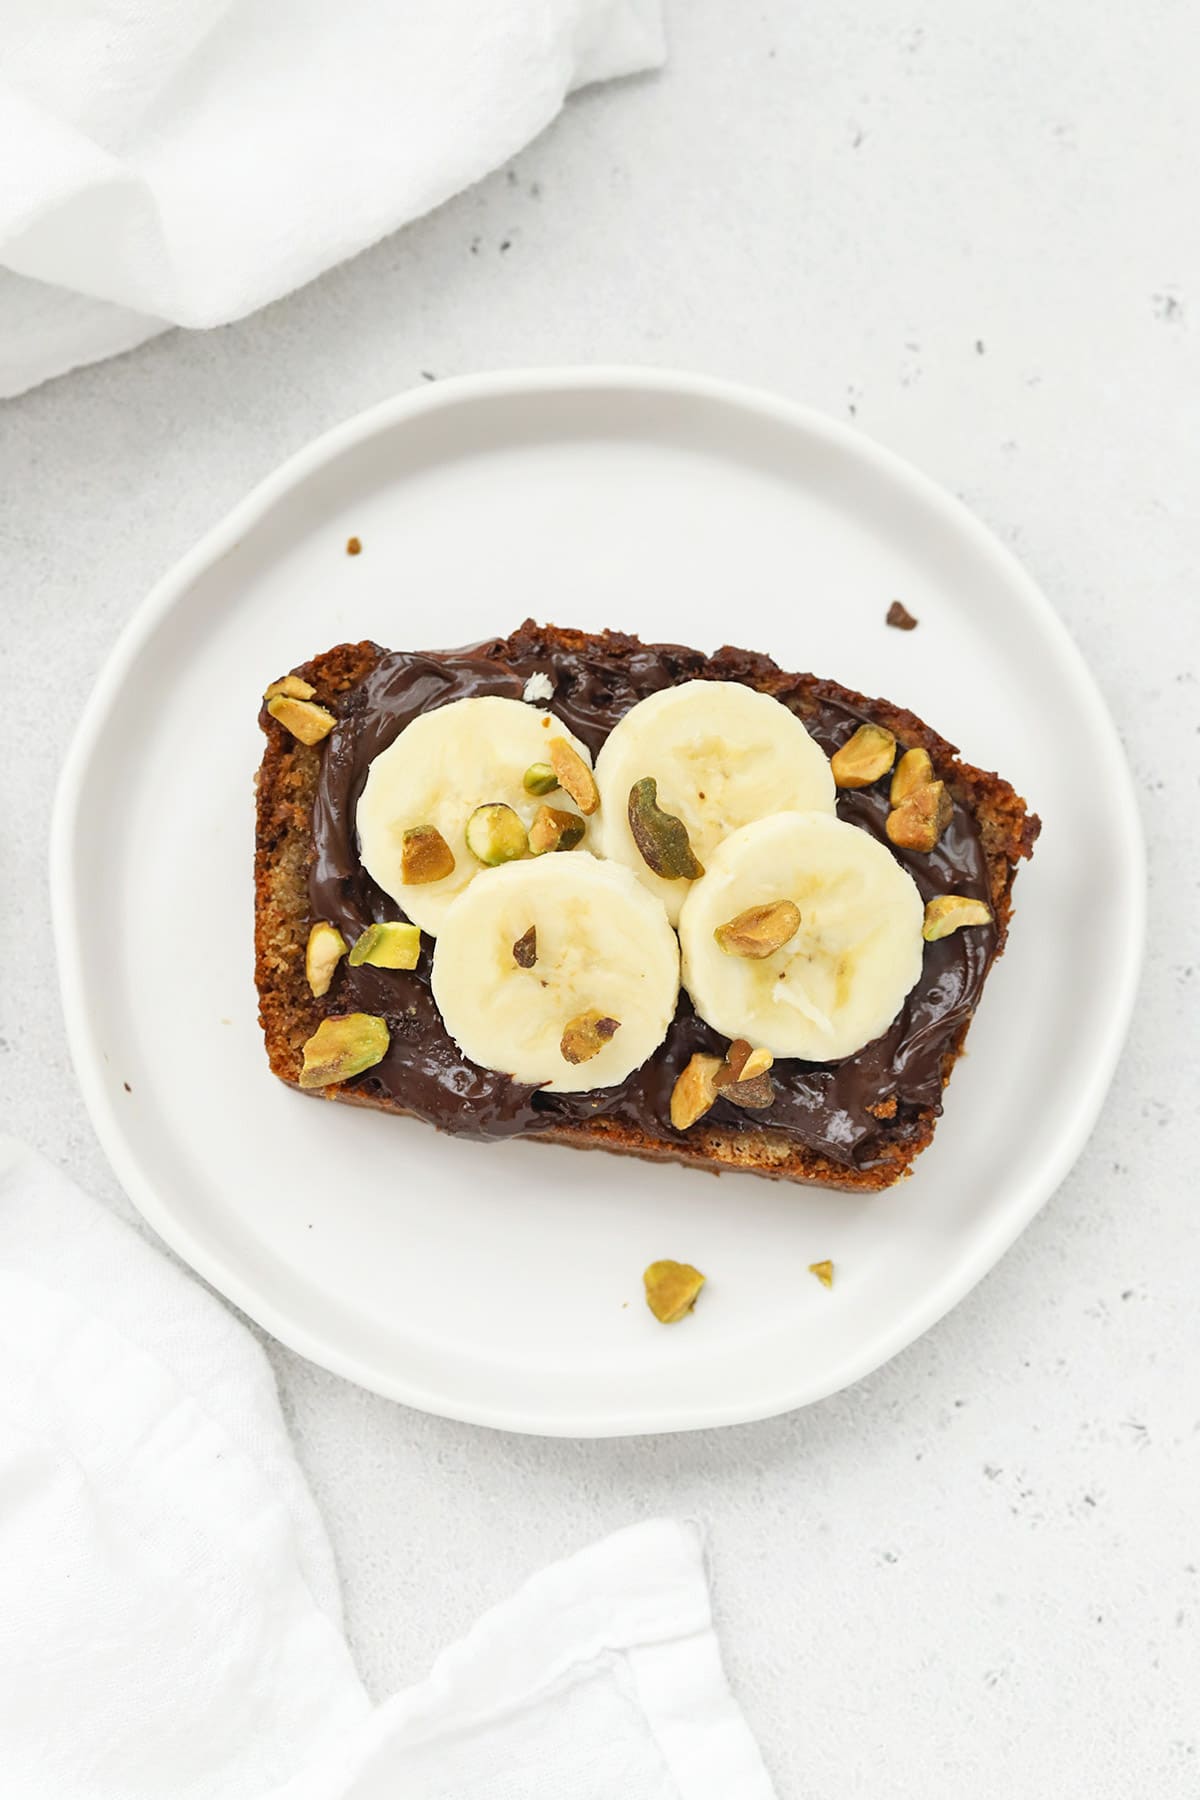 Slice of gluten-free banana bread topped with nutella, sliced bananas, and pistachios